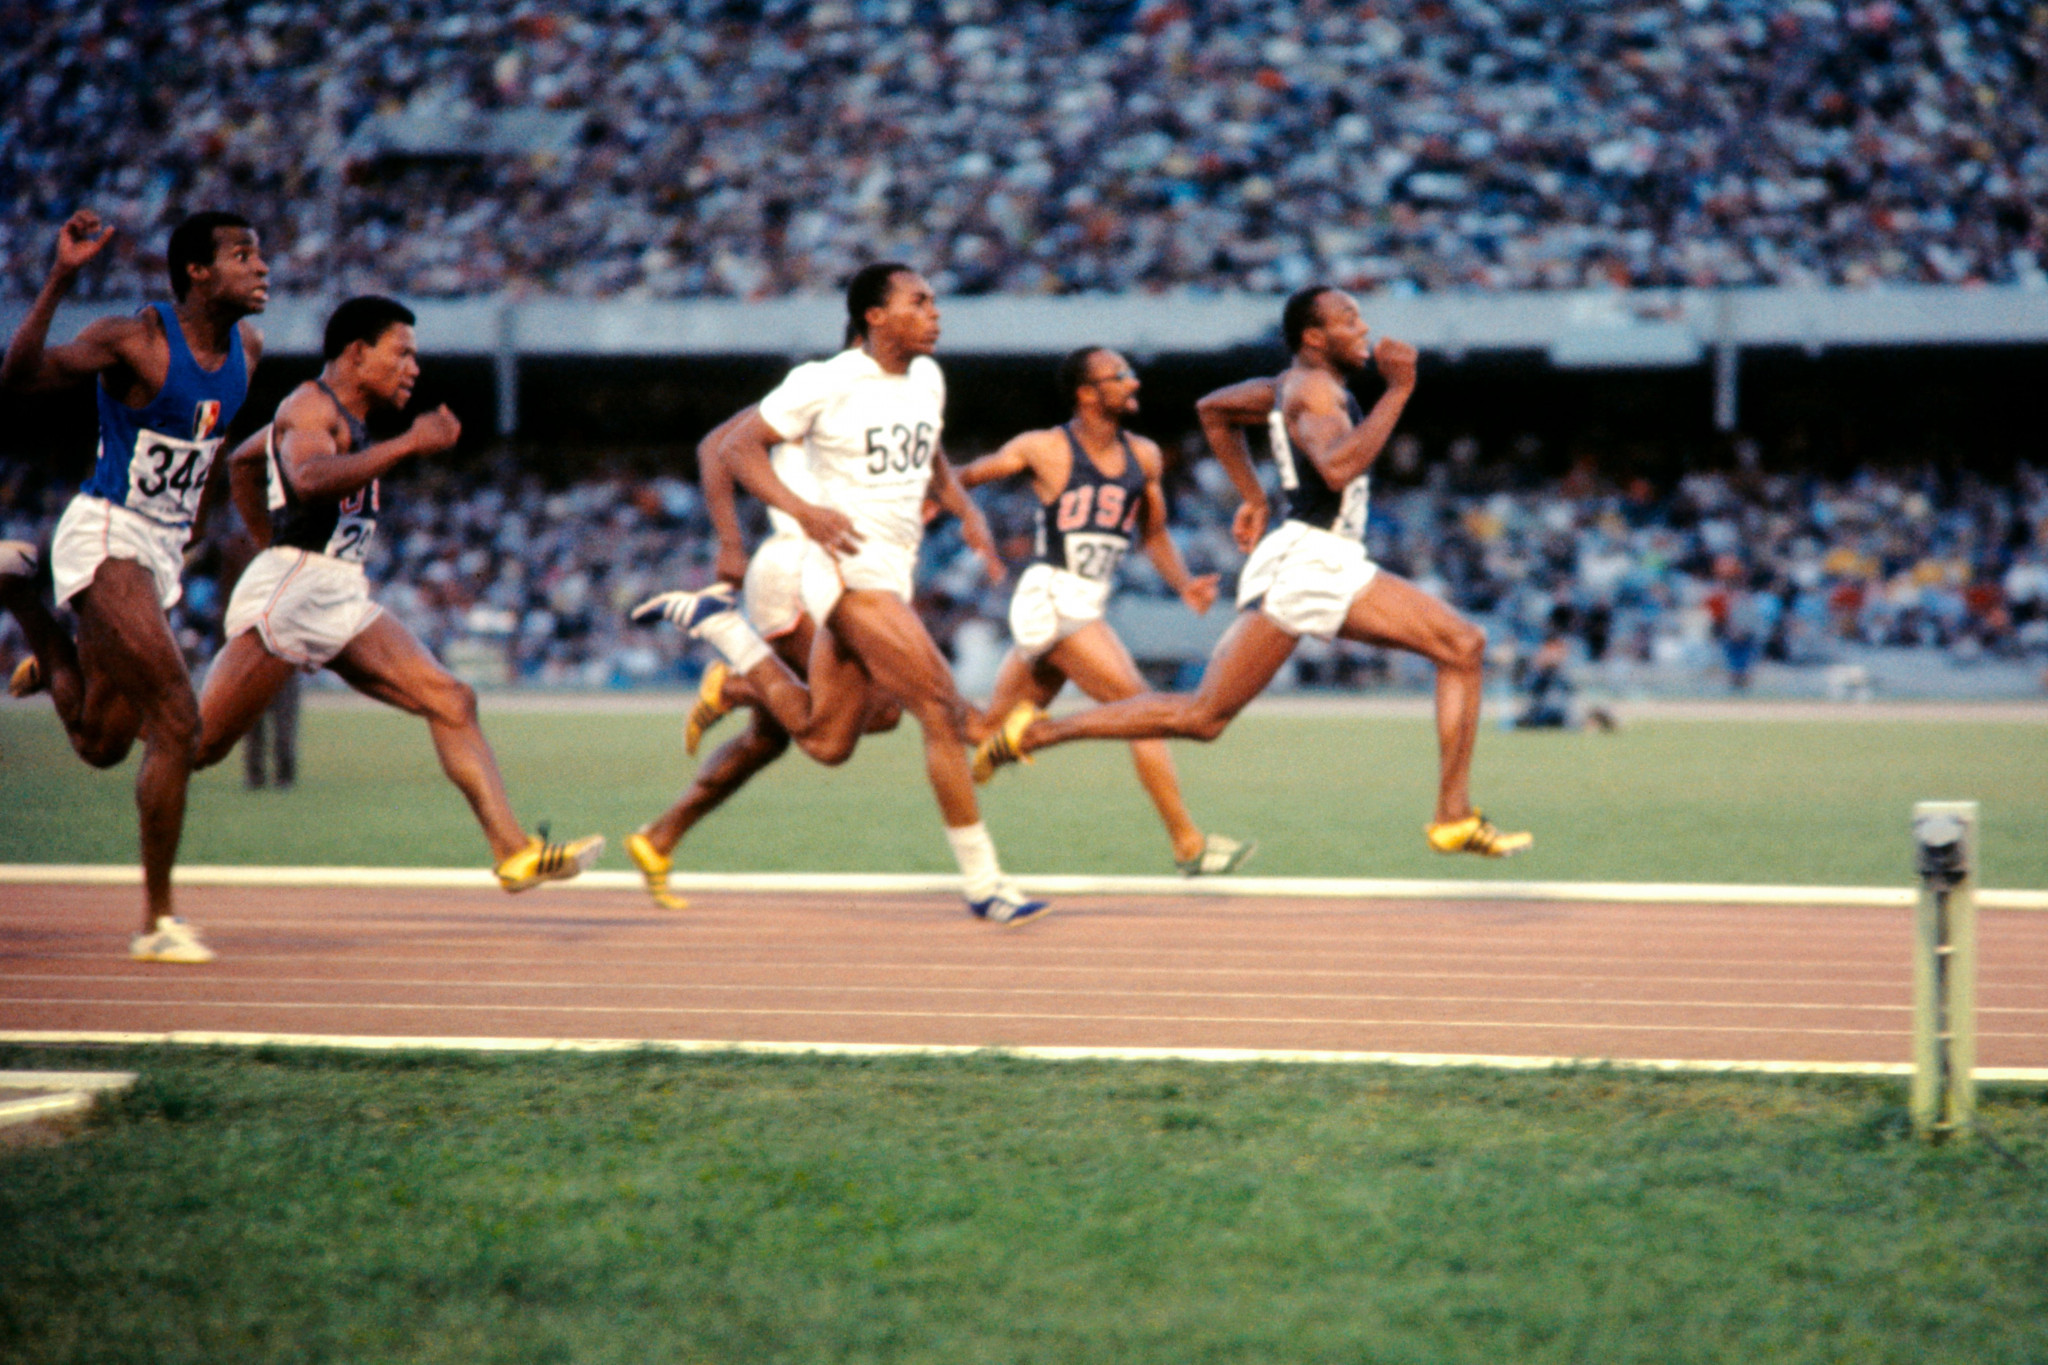 Jim Hines en route to Olympic 100m gold at the Mexico City 1968 Games in a world record of 9.95sec. He was less successful as an NFL player, earning the nickname 